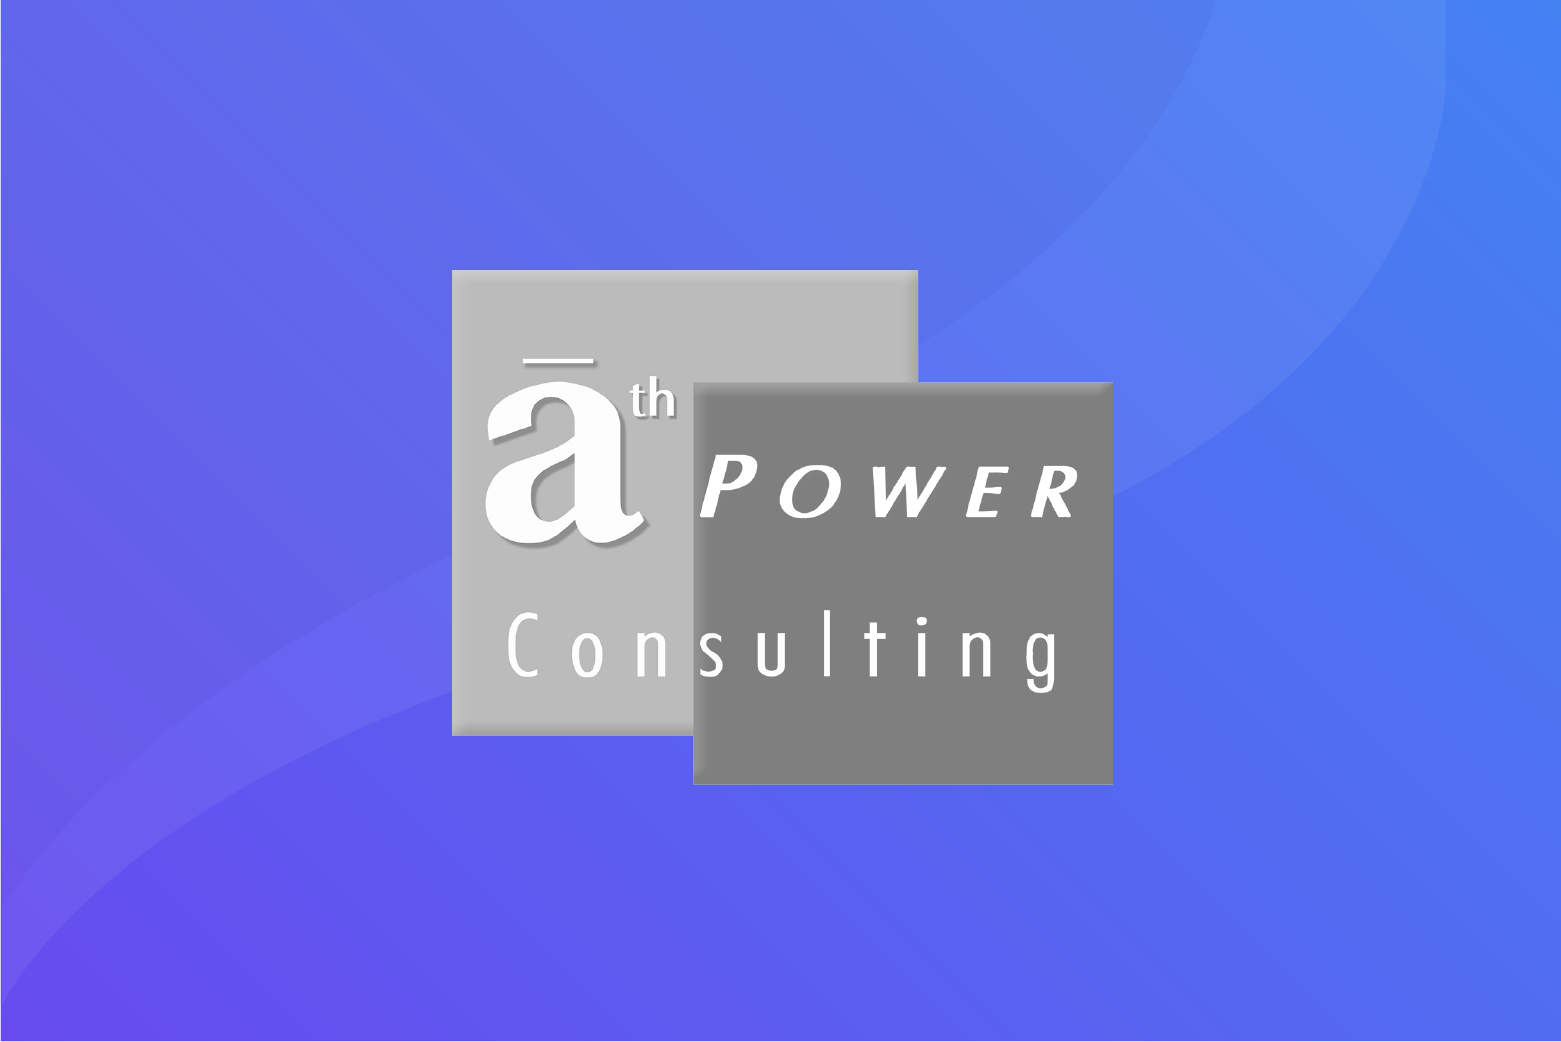 Checkbook Partners with ath Power Consulting